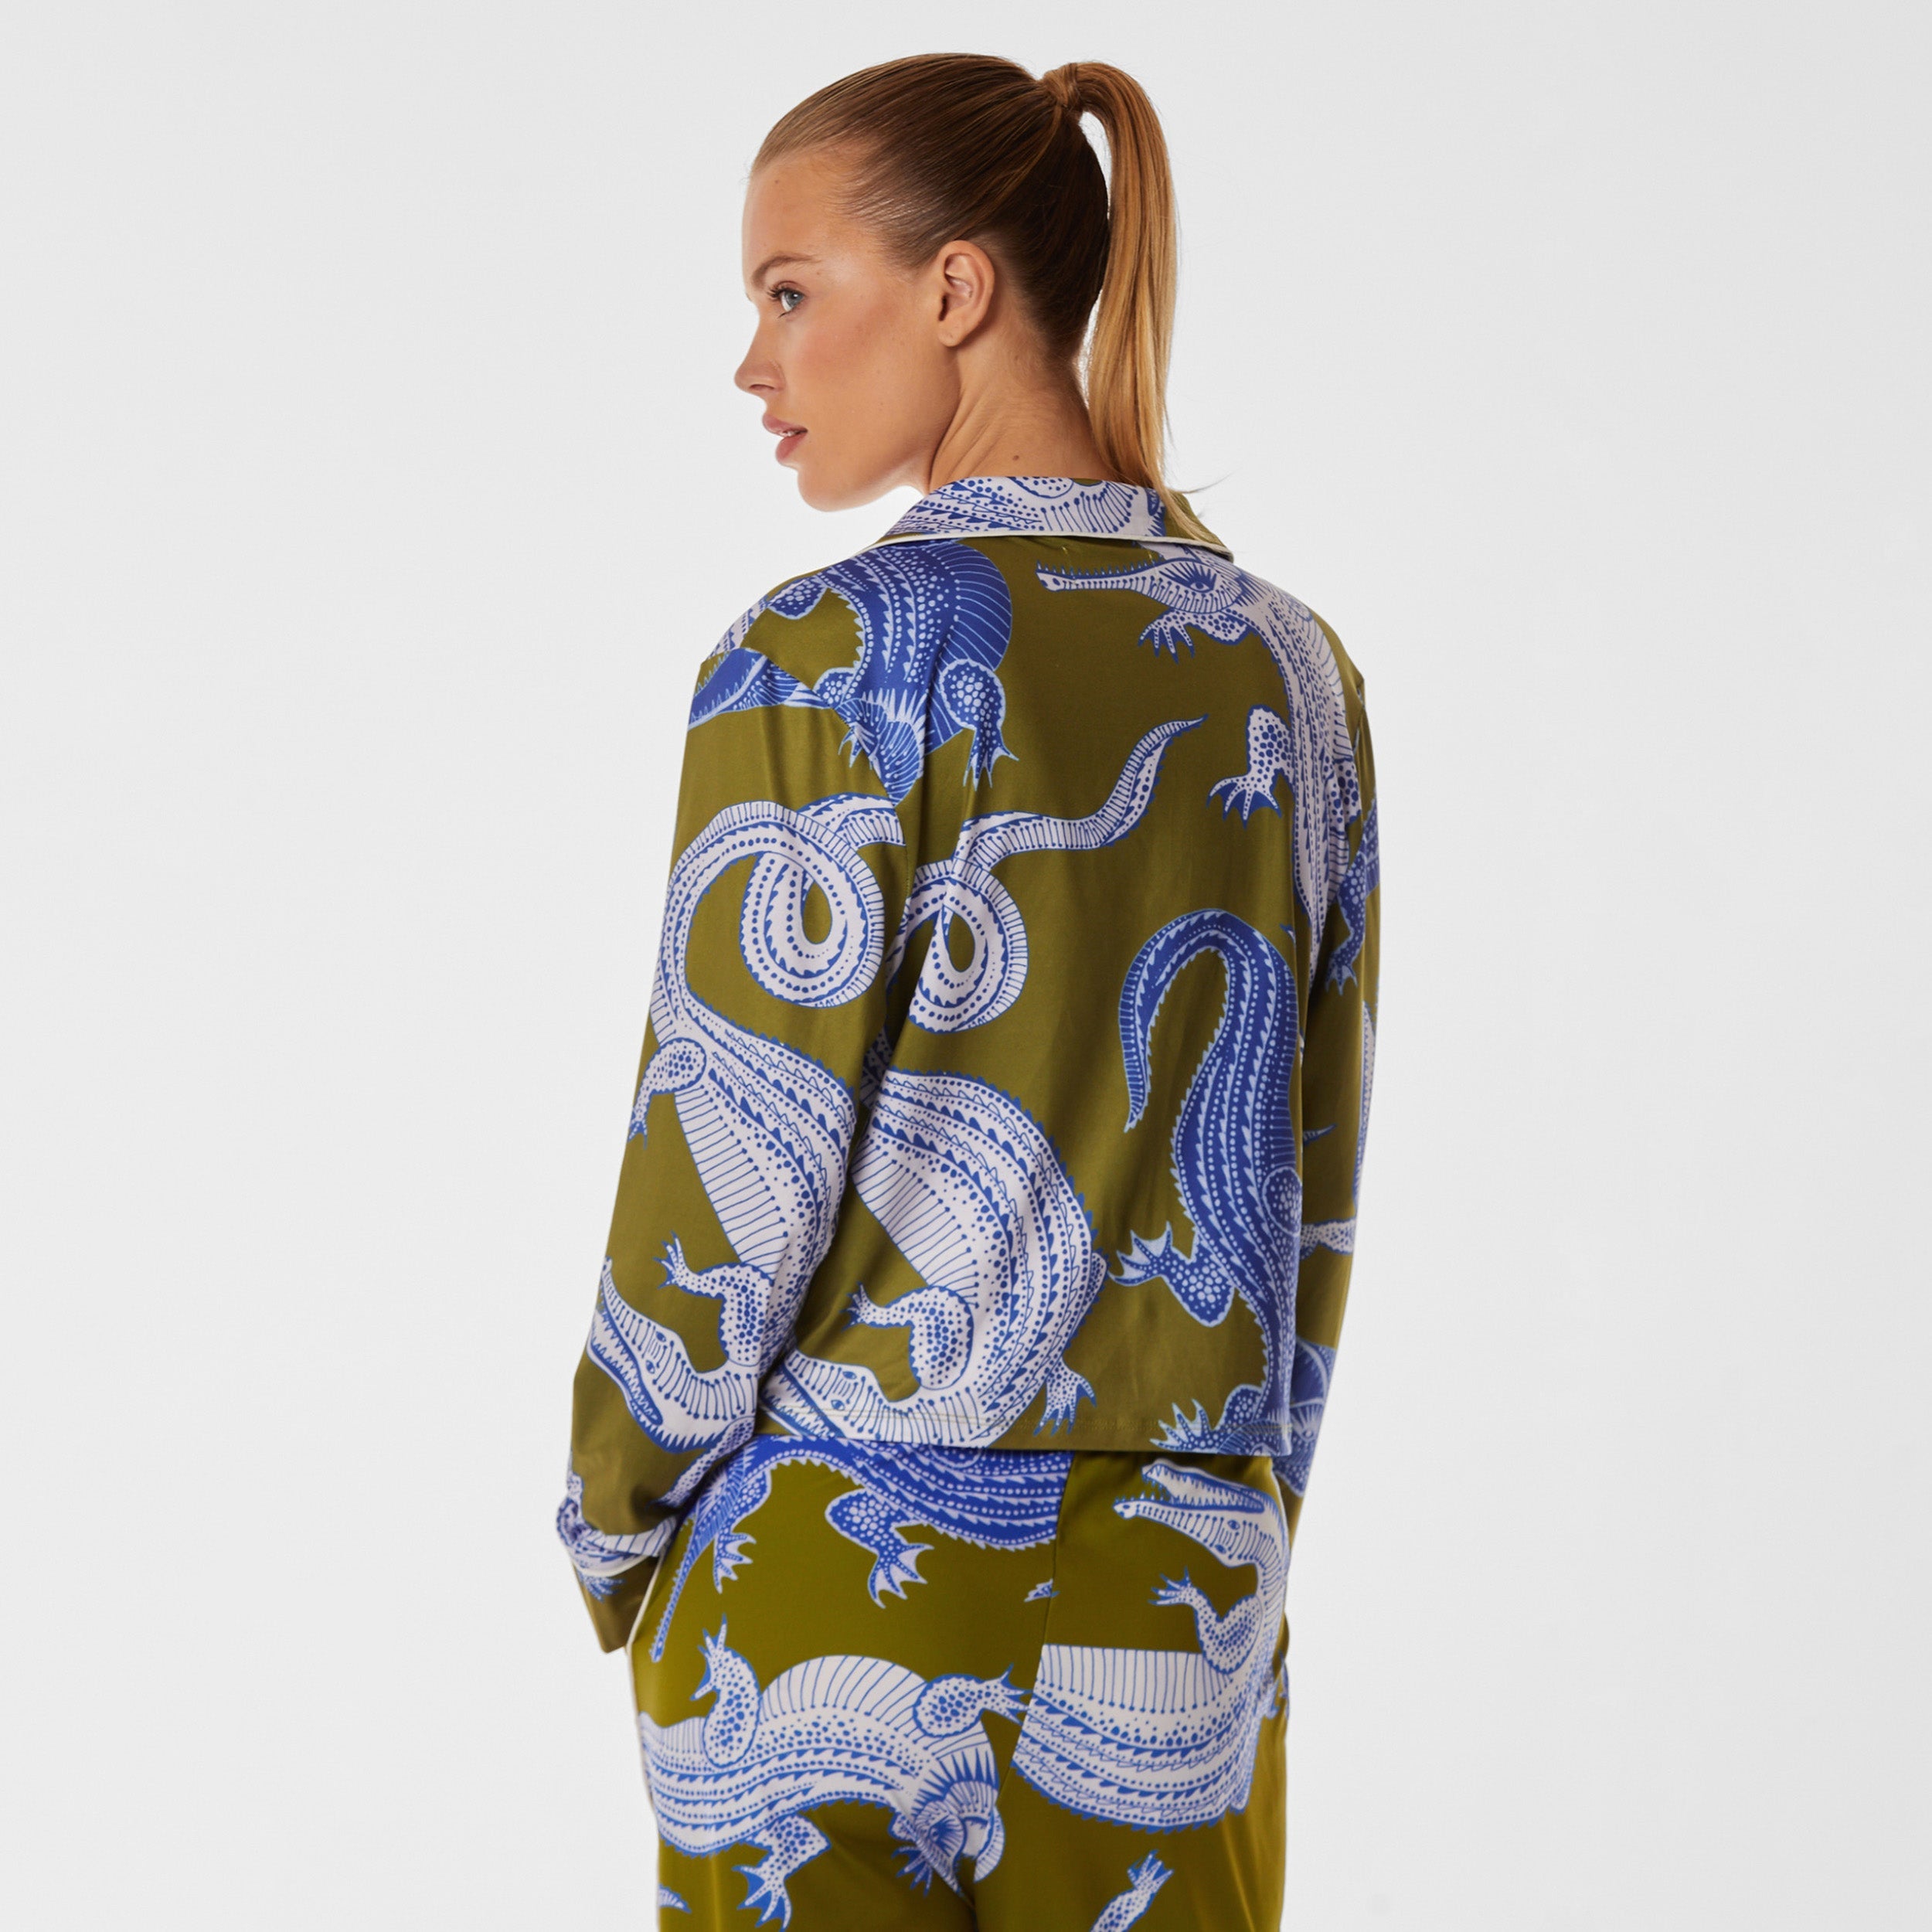 Rear view of woman wearing breathable, relaxed and buttery smooth pajama shirt featuring a button front top with notch collar and Nile gator print.